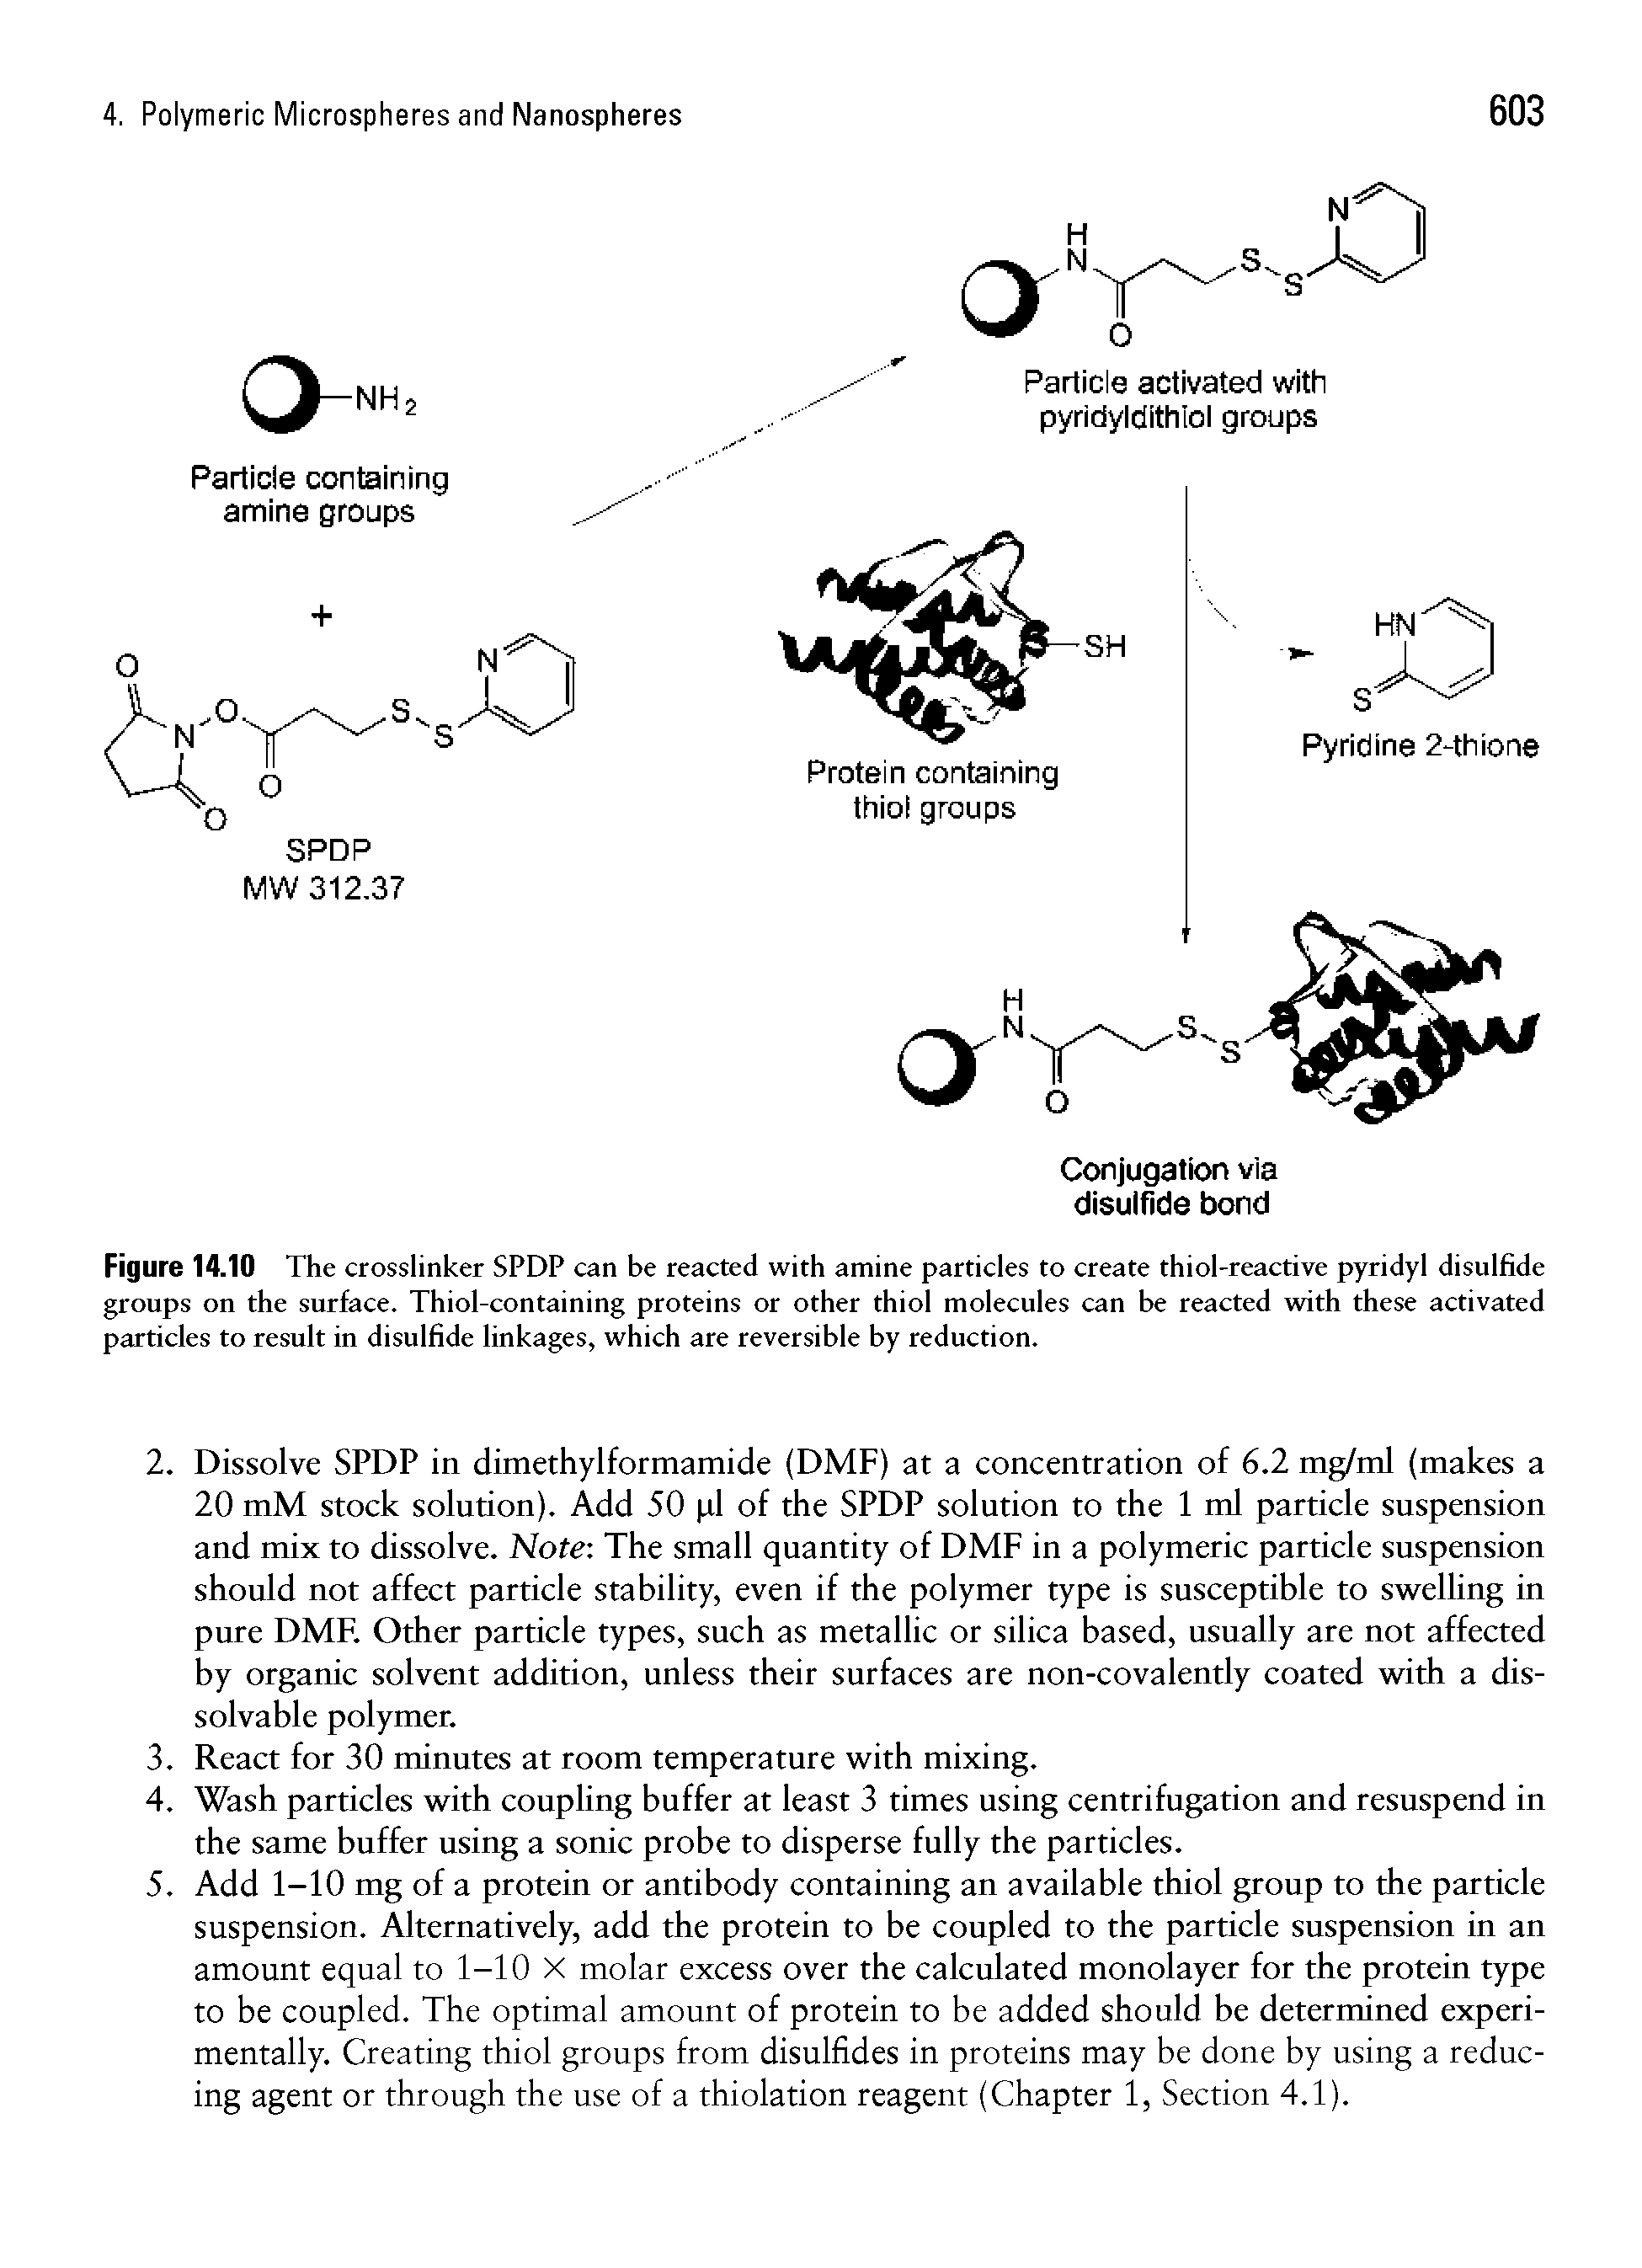 Figure 14.10 The crosslinker SPDP can be reacted with amine particles to create thiol-reactive pyridyl disulfide groups on the surface. Thiol-containing proteins or other thiol molecules can be reacted with these activated particles to result in disulfide linkages, which are reversible by reduction.